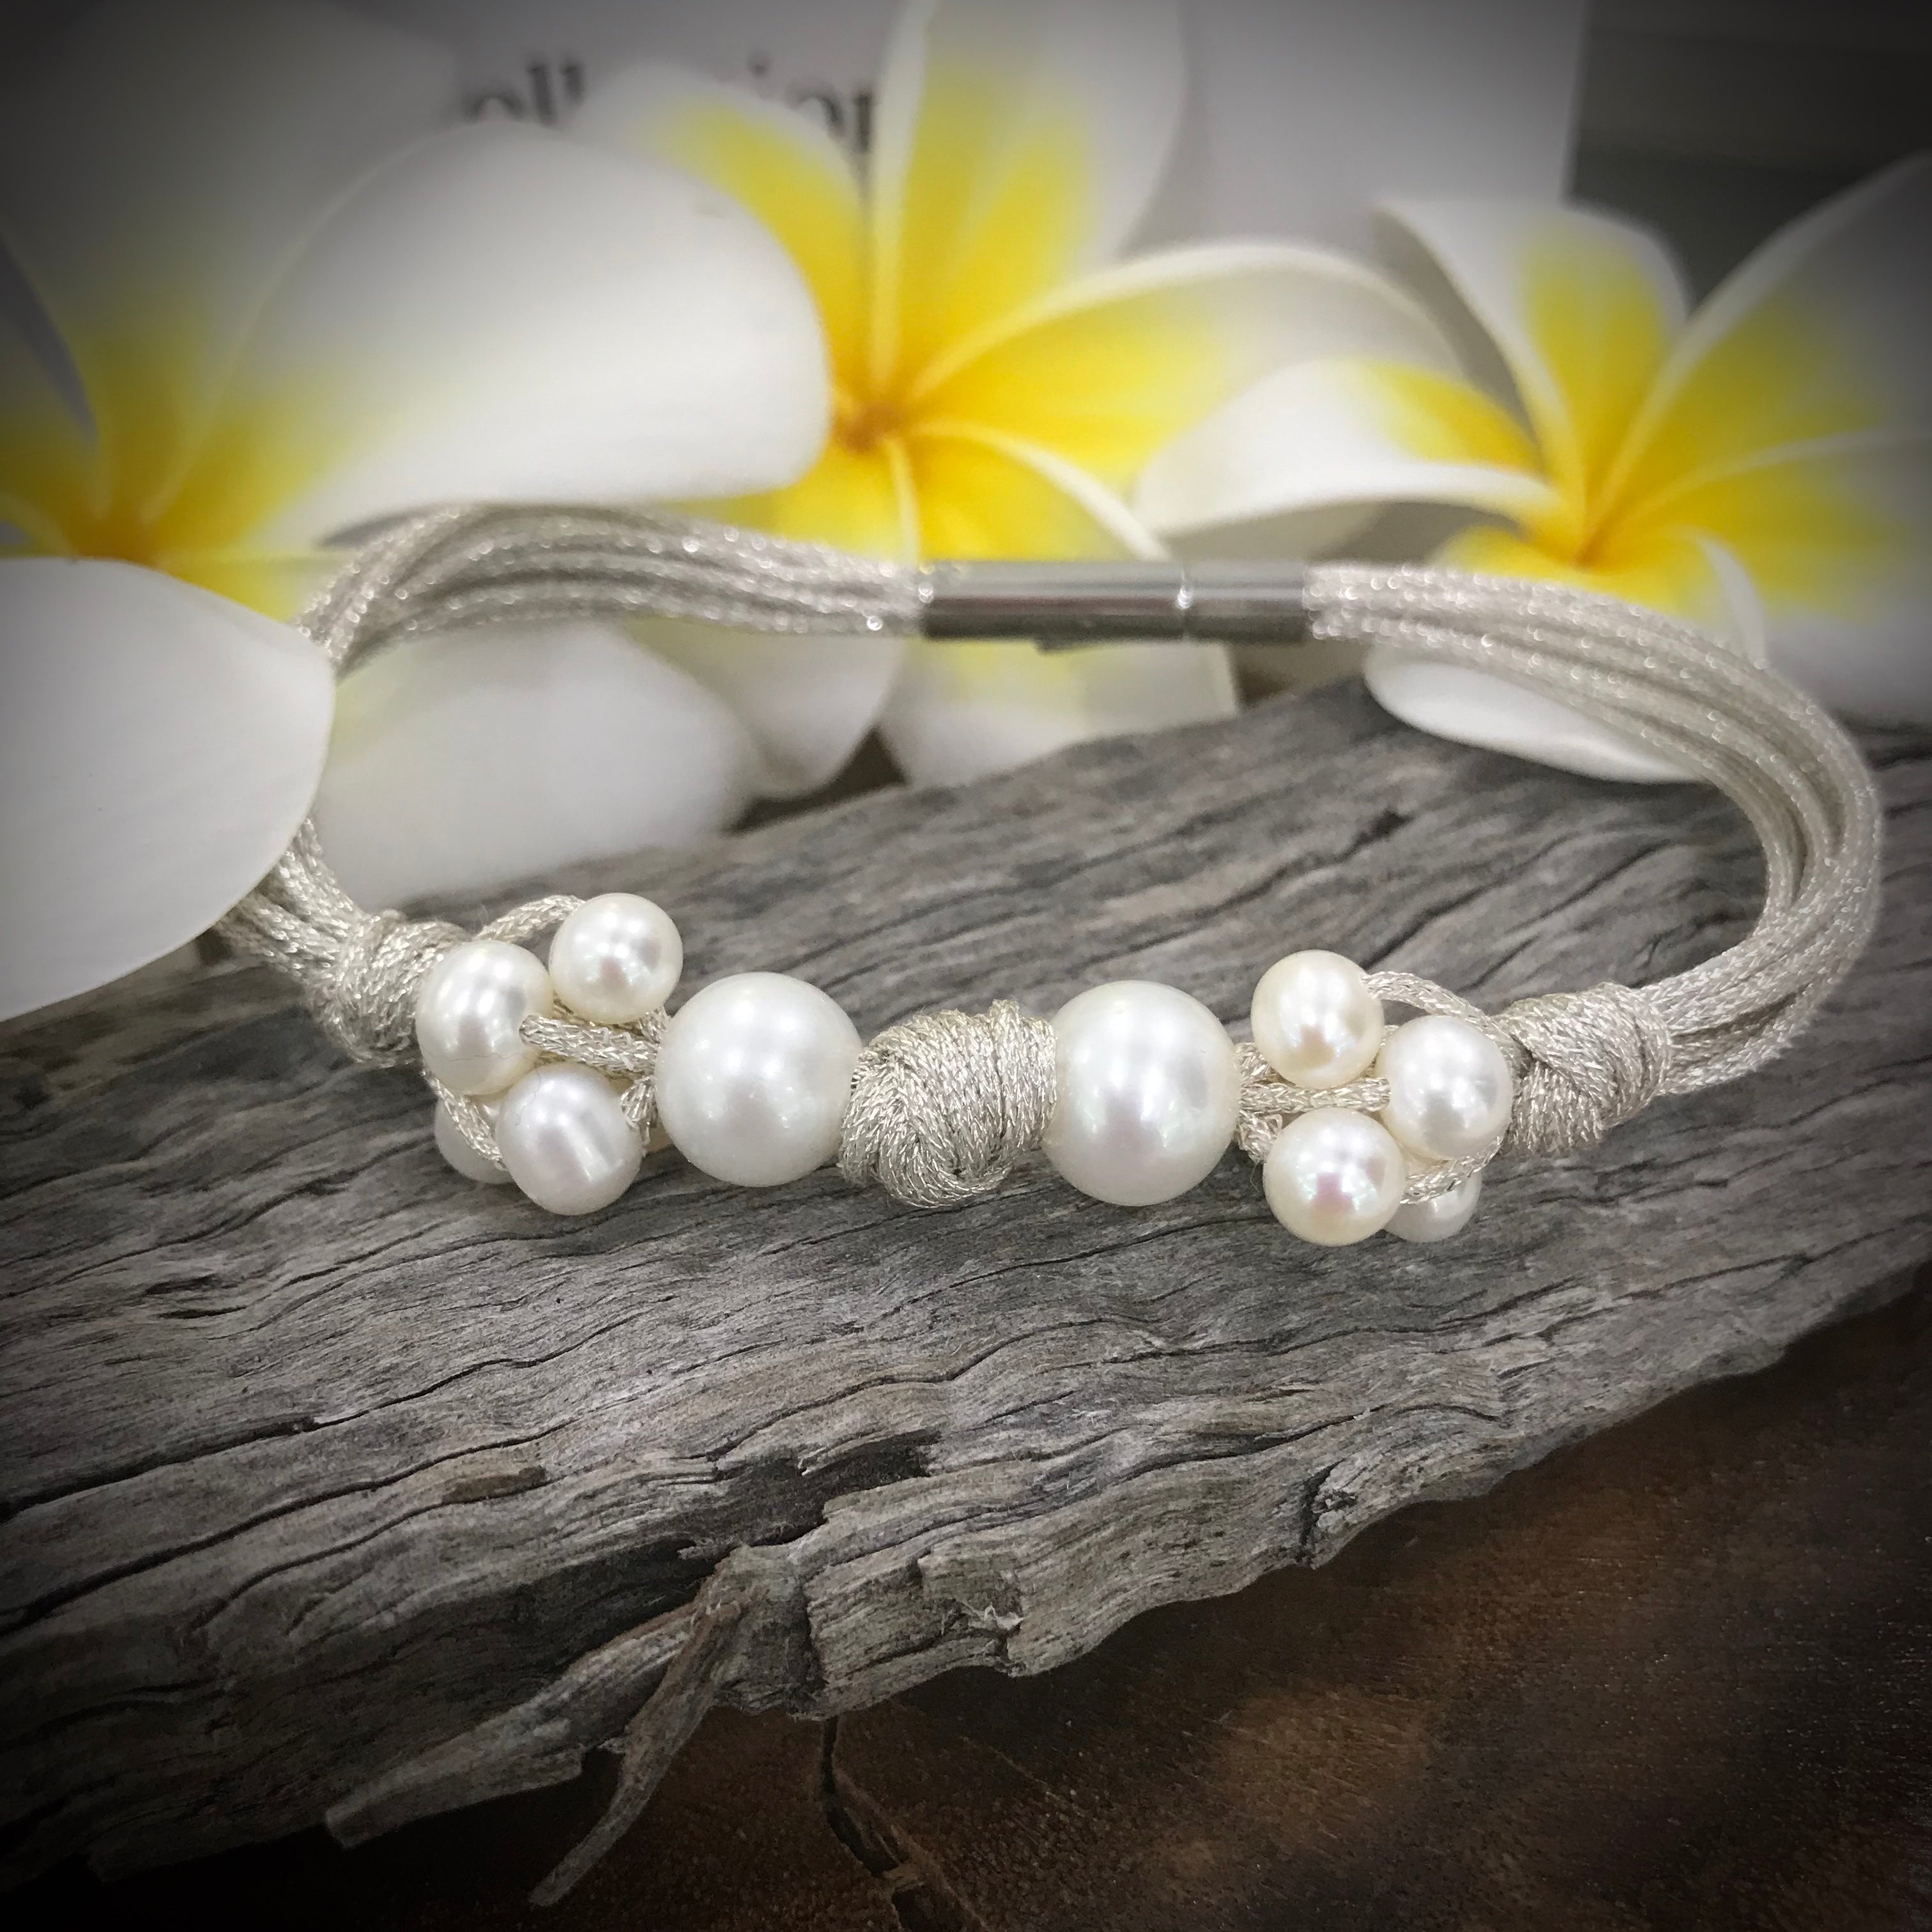 Bracelet with Cultured Freshwater Pearl in 10kt Yellow Gold